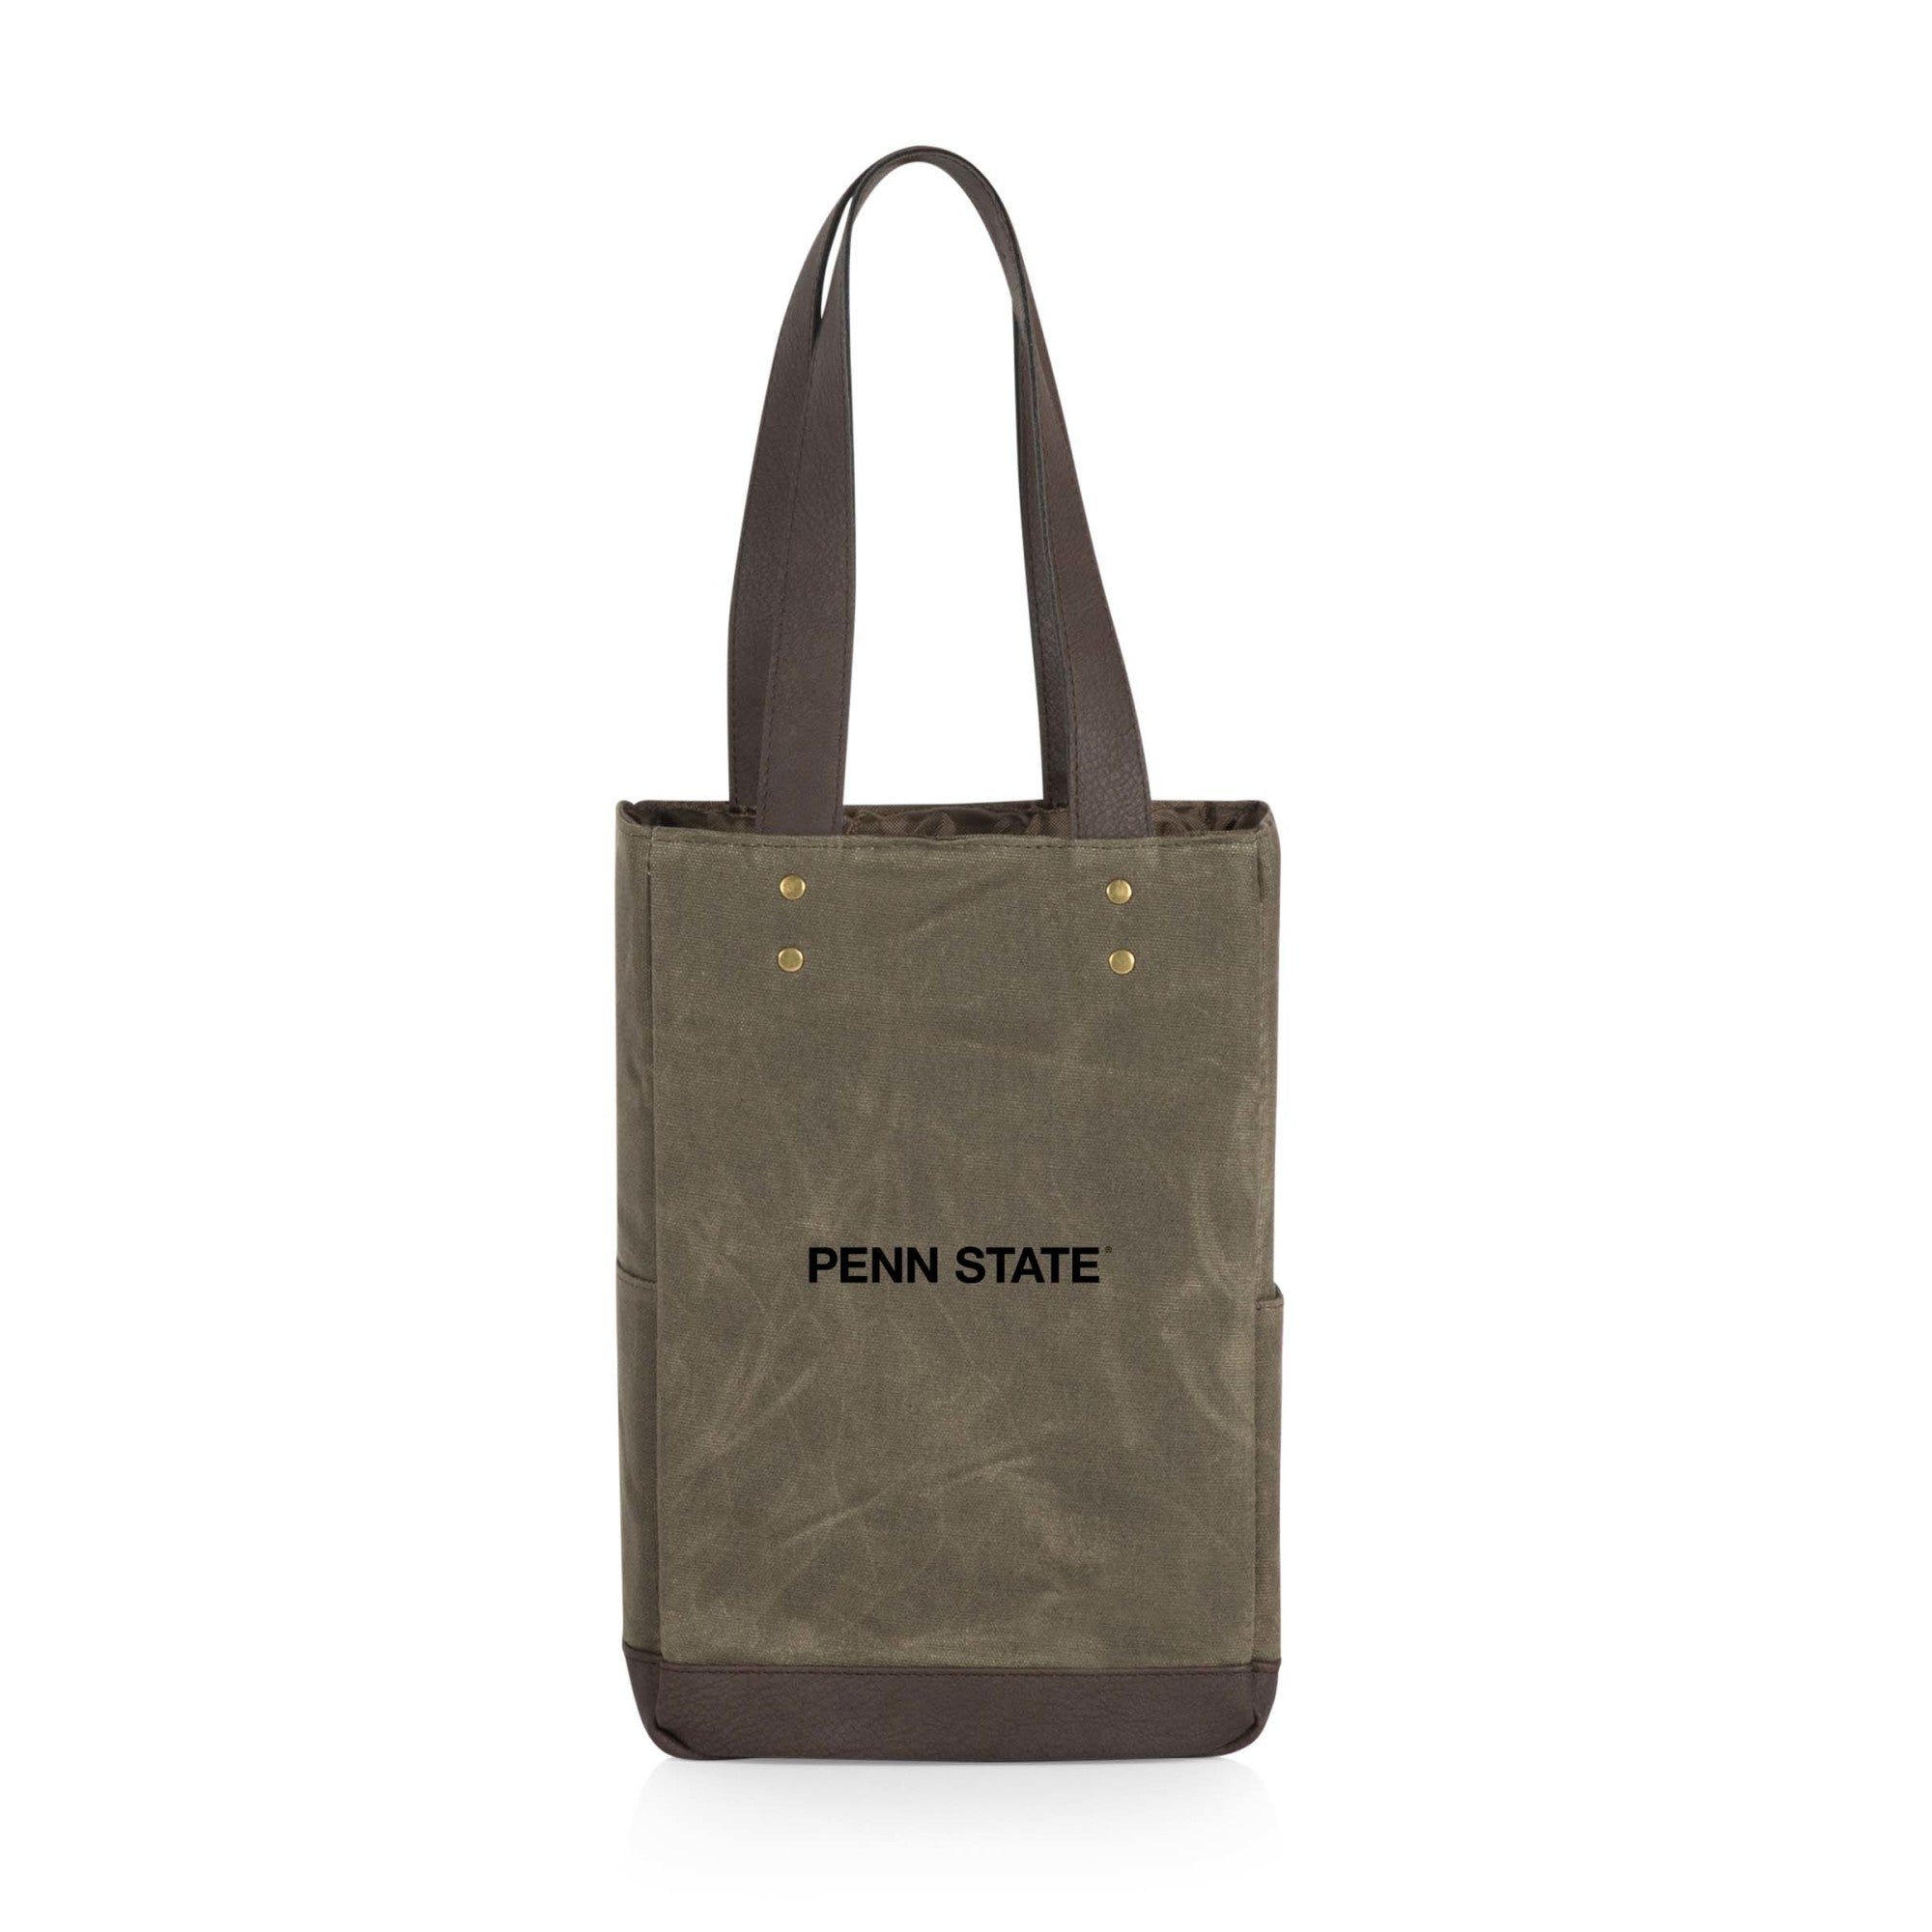 Penn State Nittany Lions - 2 Bottle Insulated Wine Cooler Bag